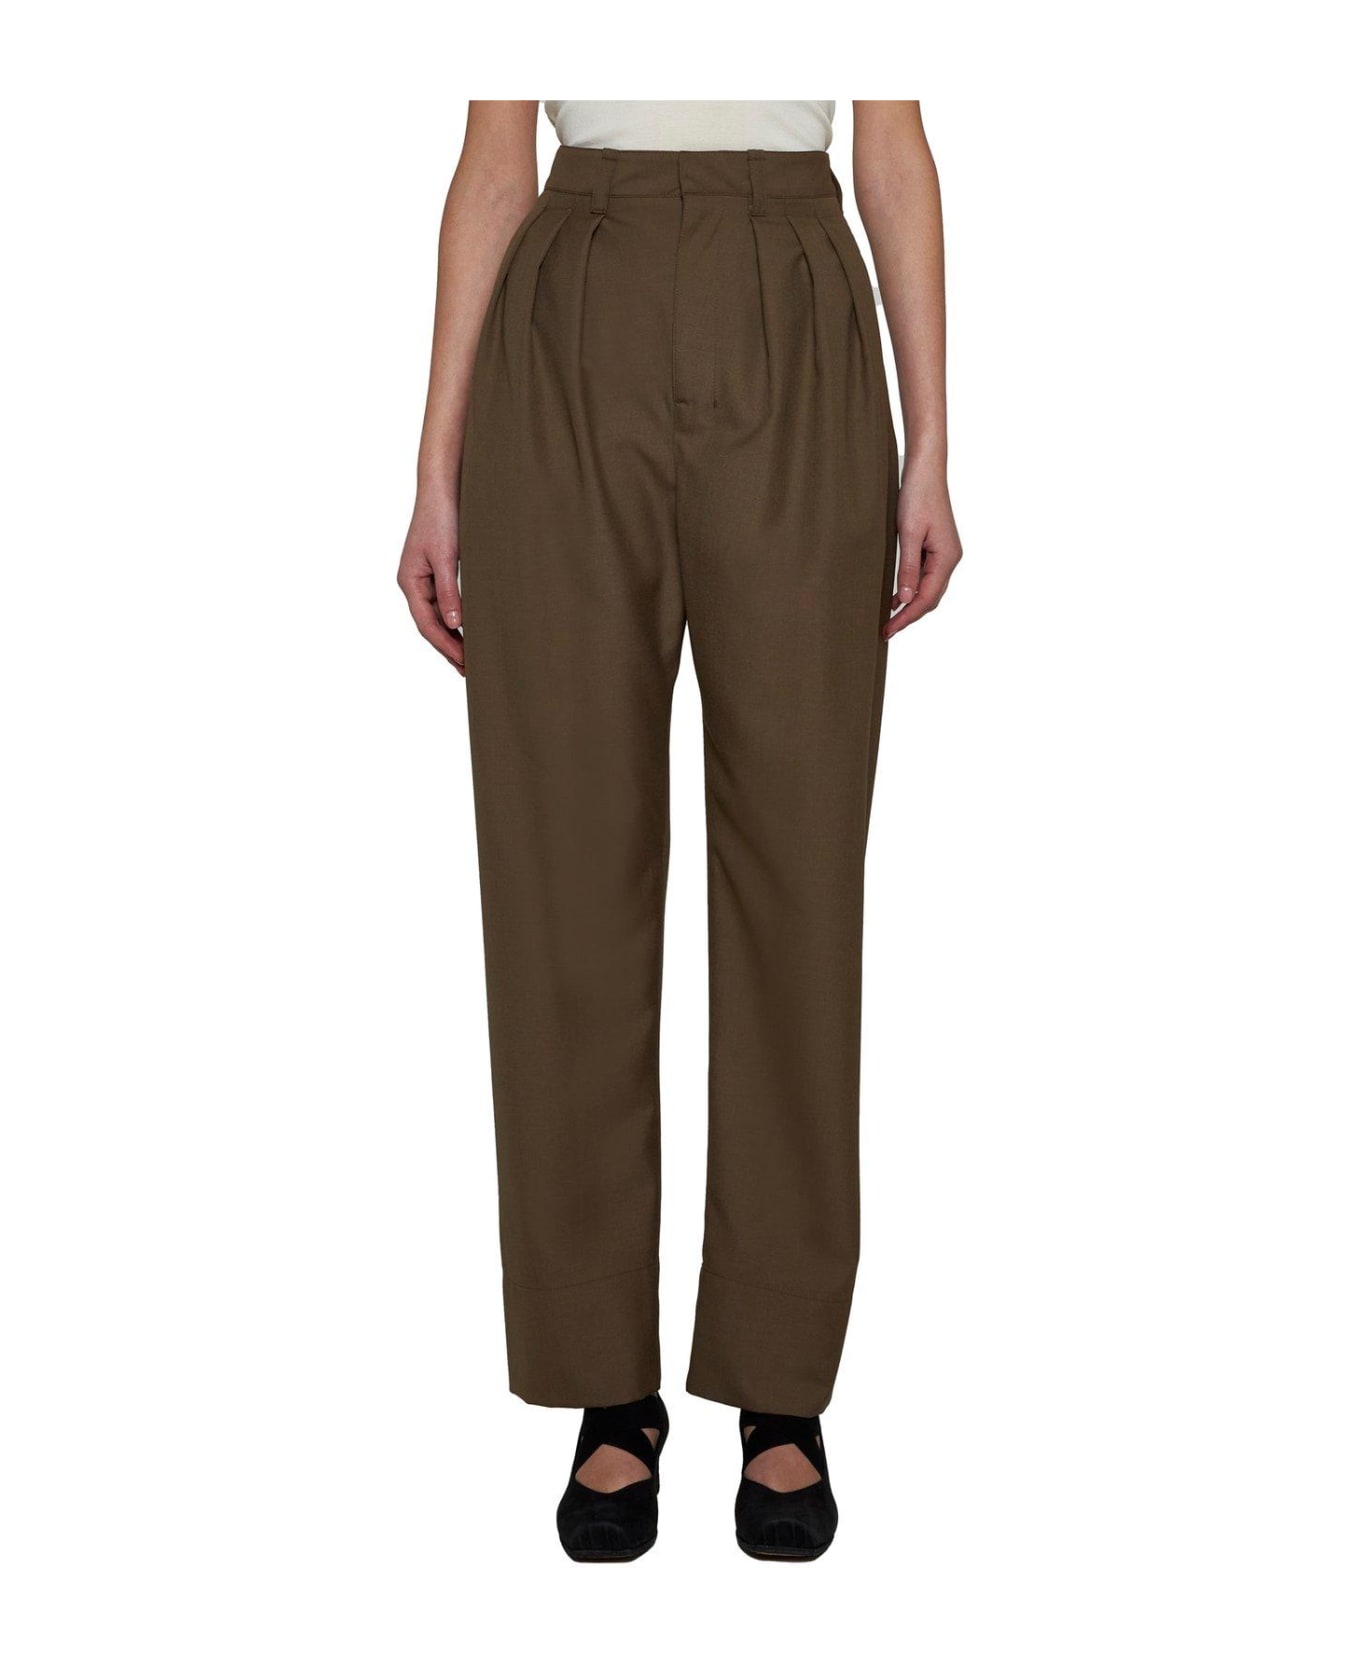 Lemaire Pleated Tailored Trousers - BROWN ボトムス